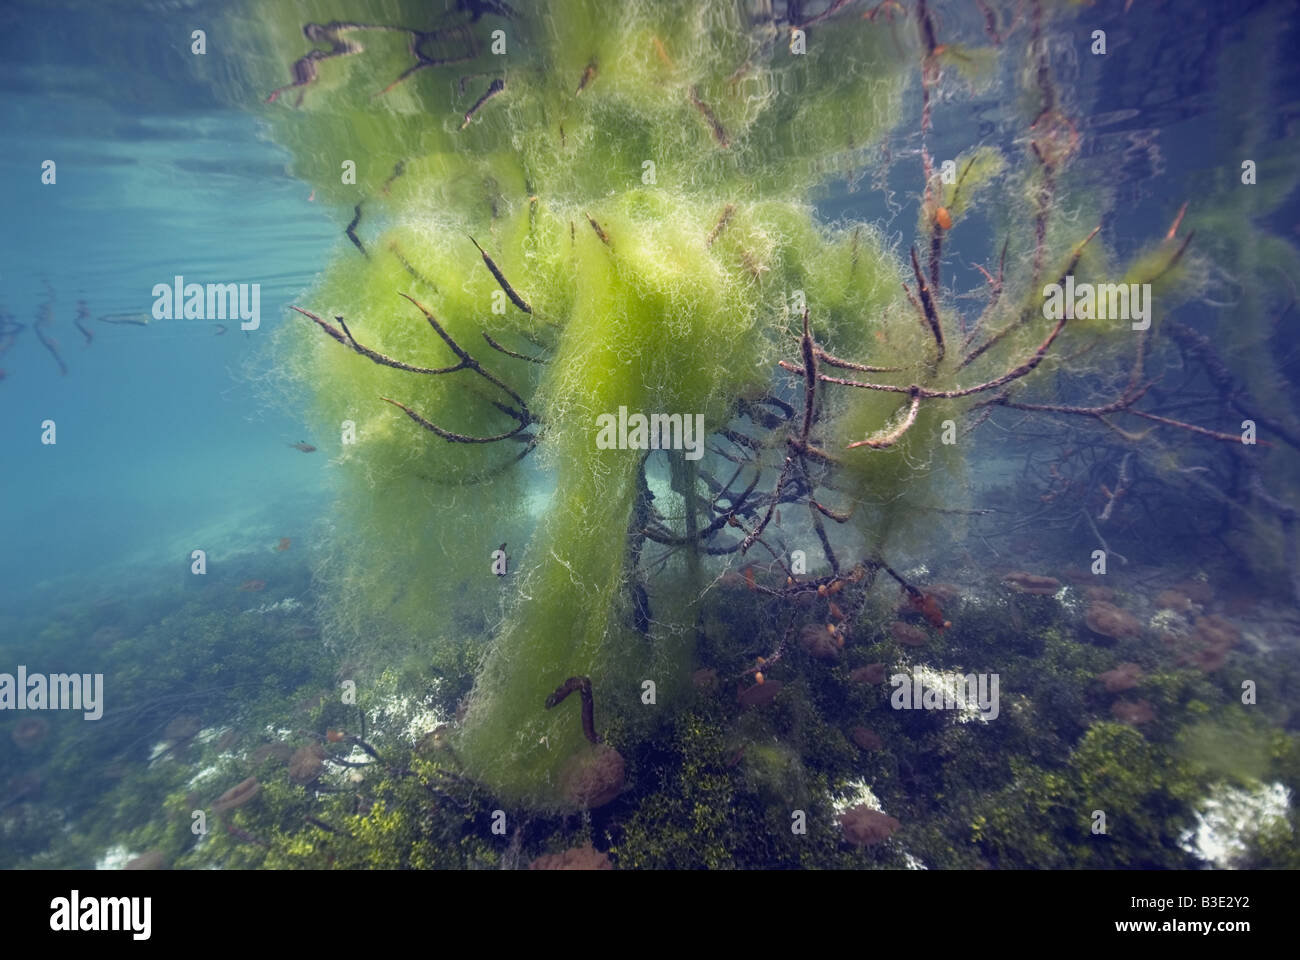 Under water tree formed by mangrove tree branches hanging in the water overgrown with seaweed Stock Photo